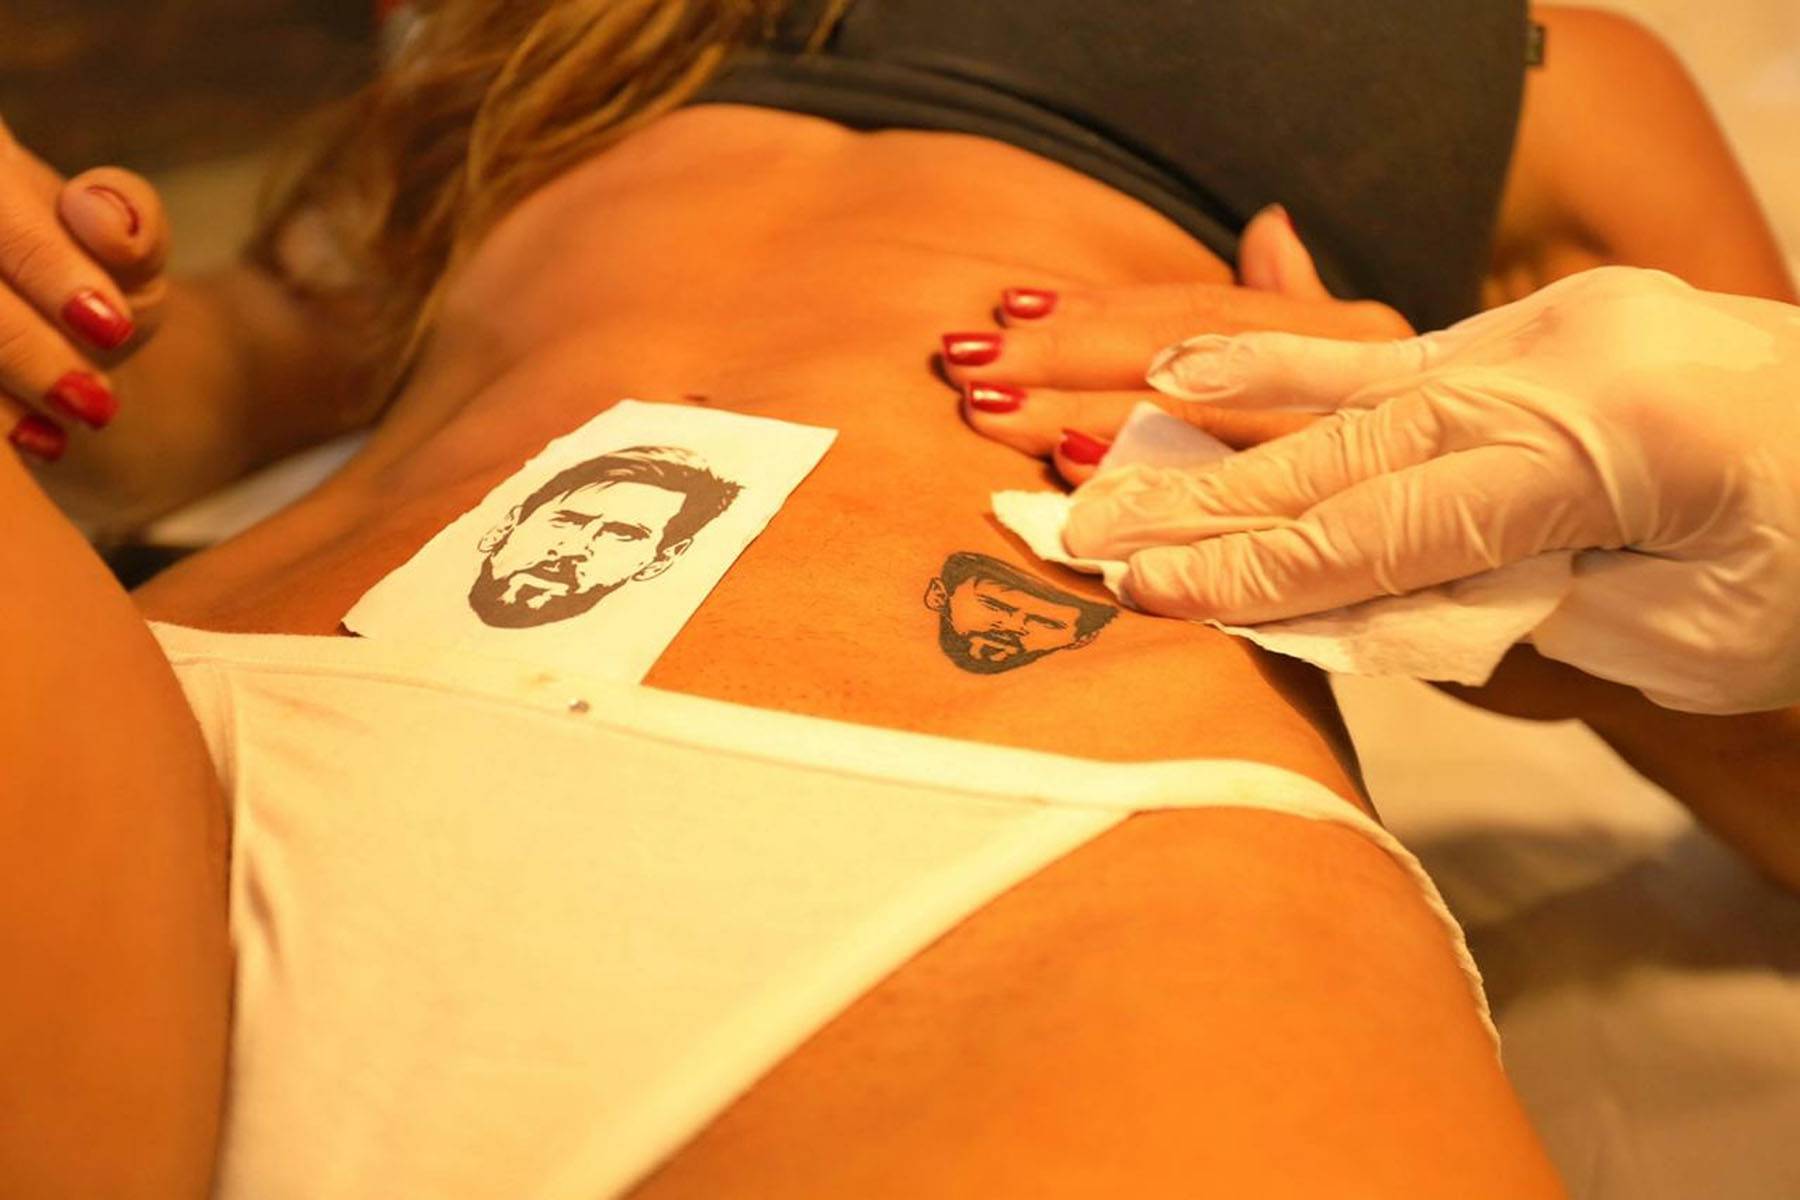 Miss Bumbum Suzy Cortez Gets Tattoo Of Football Hero Lionel Messi On Her Groin